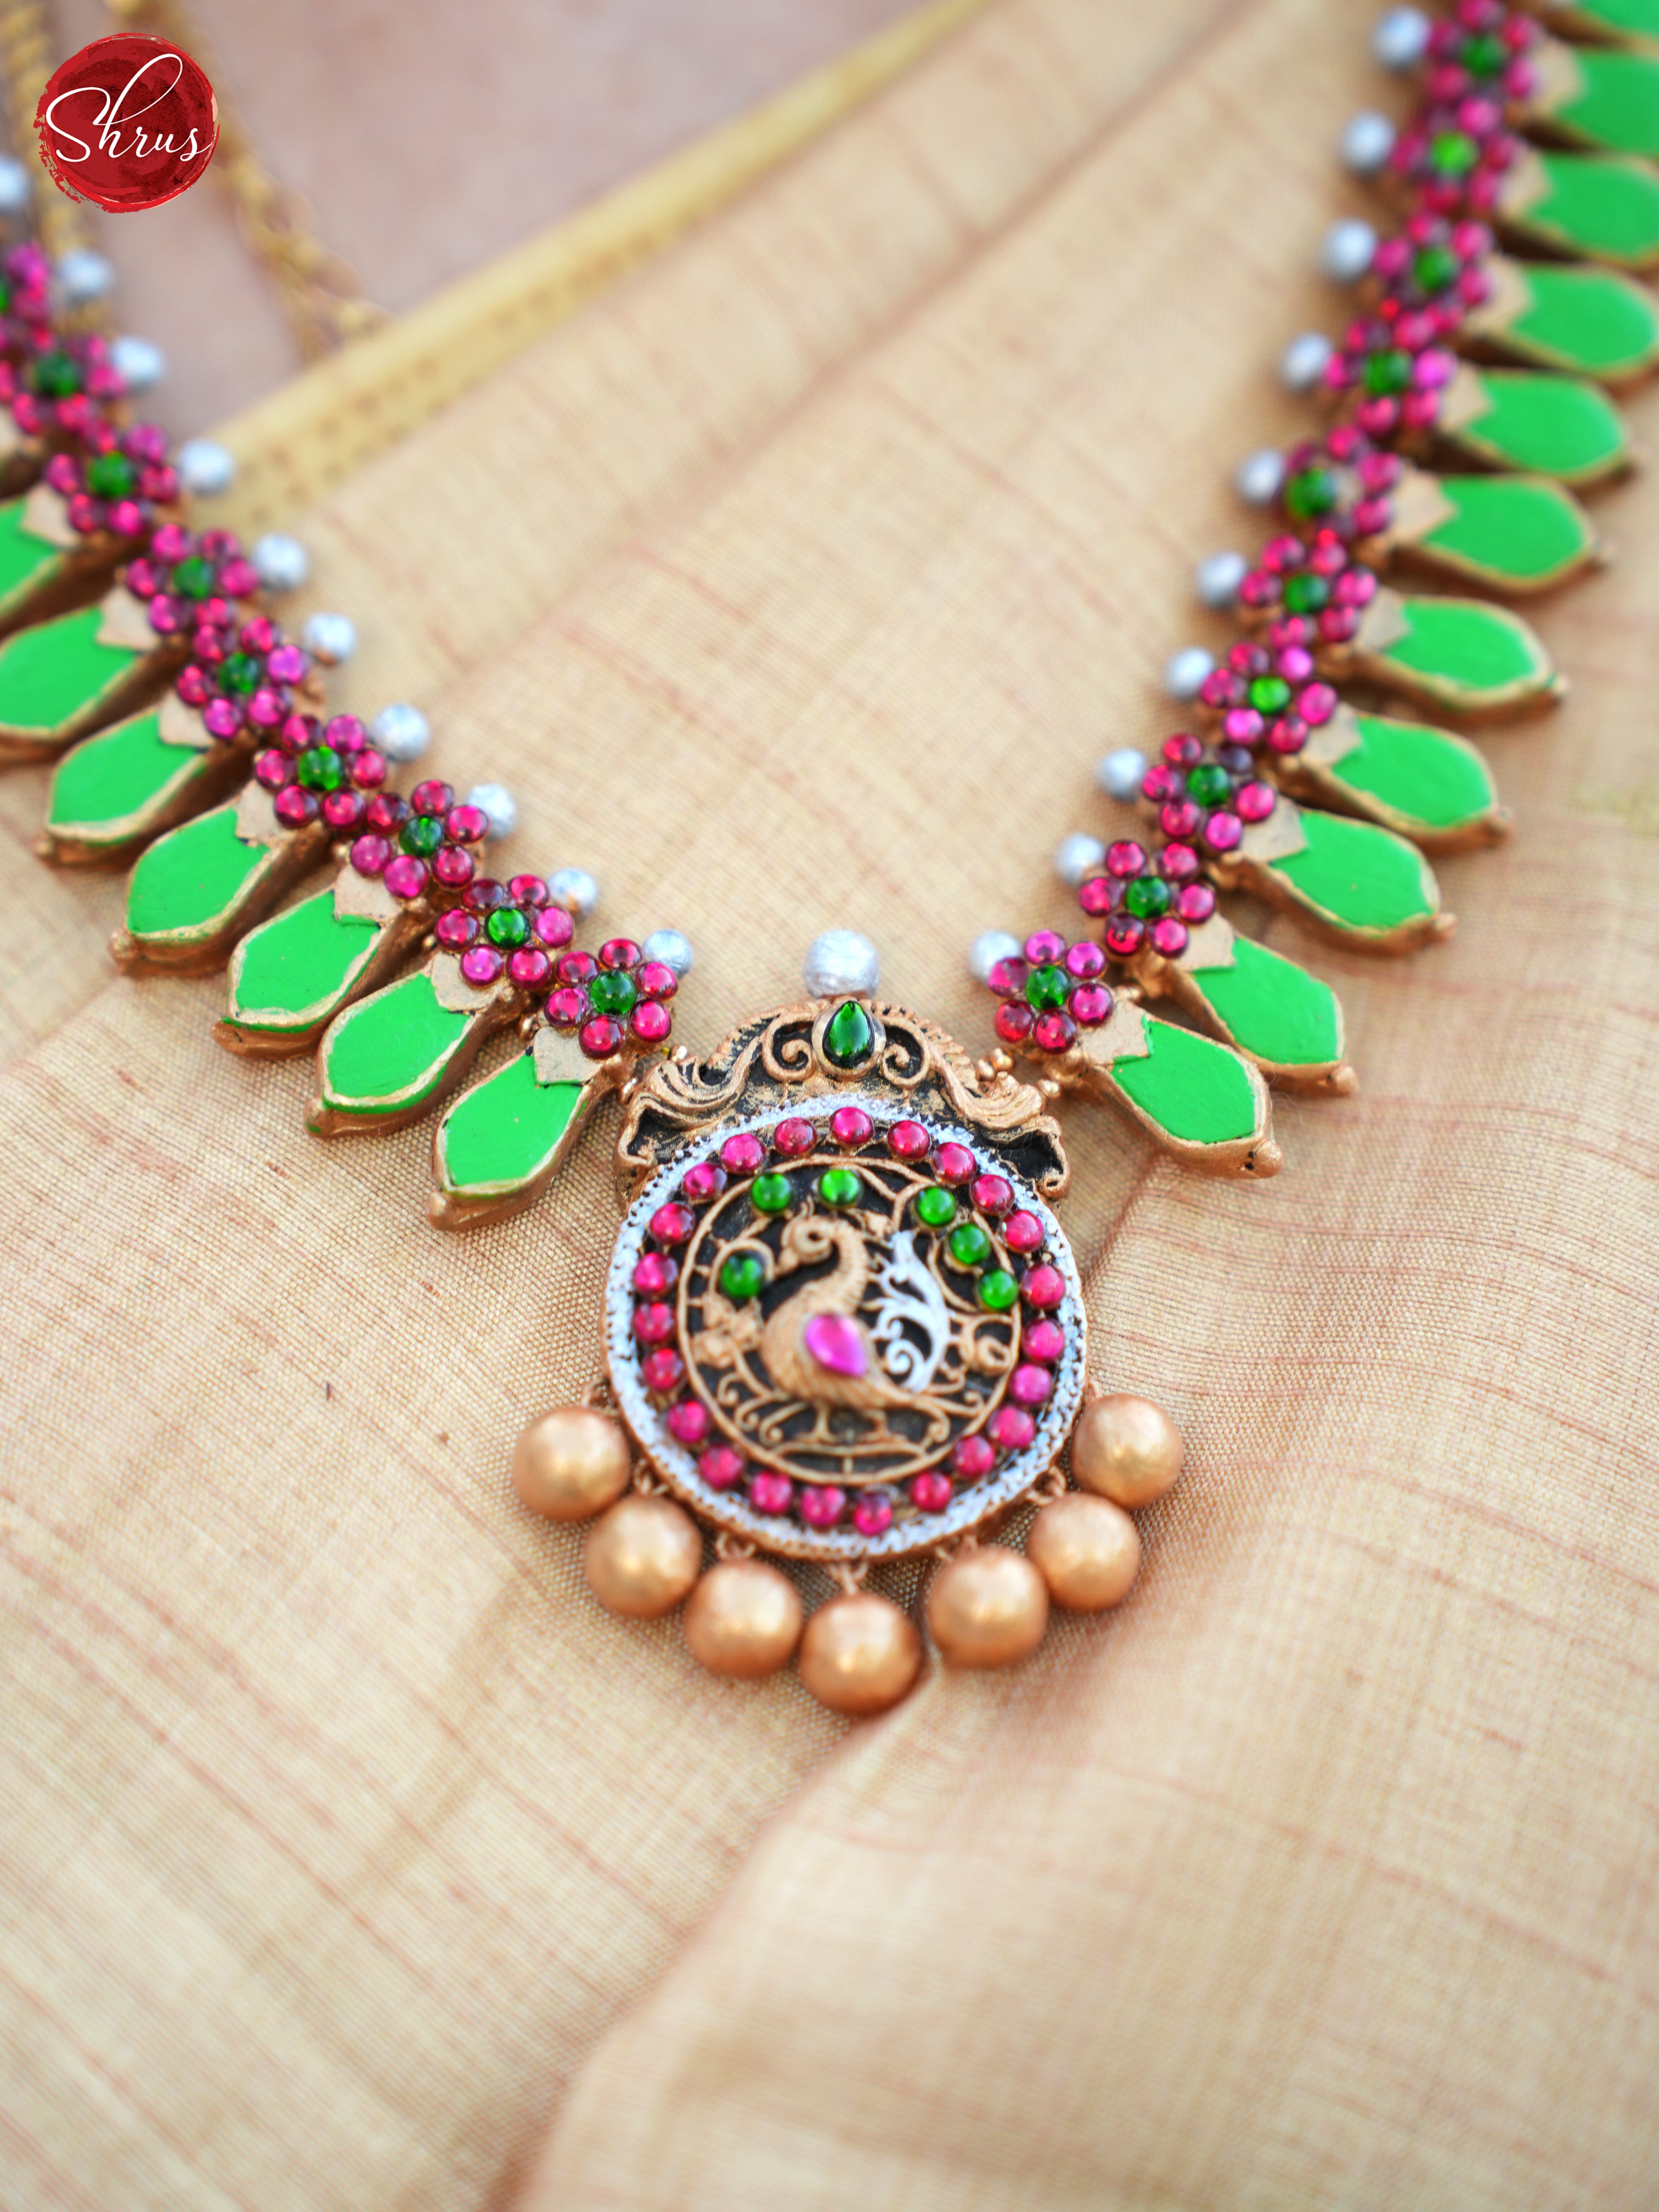 Handpainted TerraCotta Necklace with Jhumkas- Accessories - Shop on ShrusEternity.com